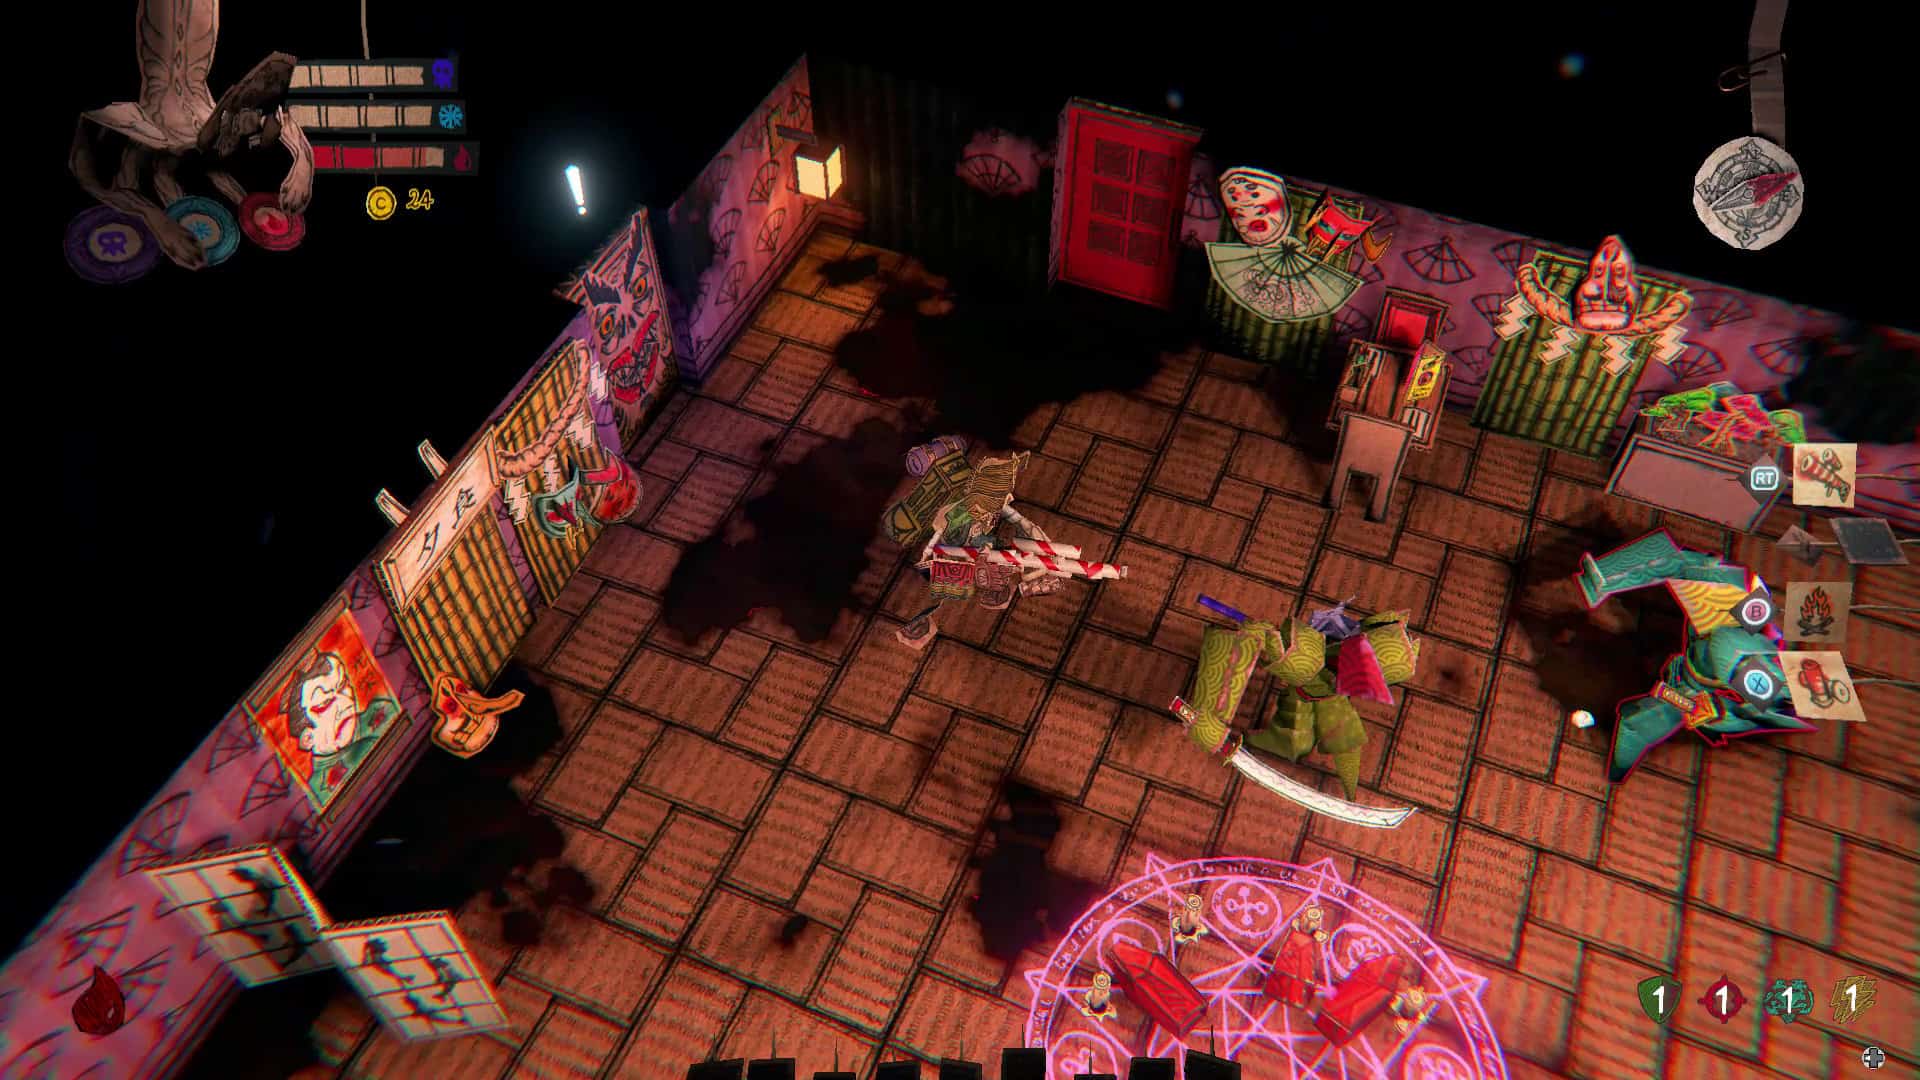 Paper Cut Mansion offers a cardboard-crafted style roguelite for console and PC later this year